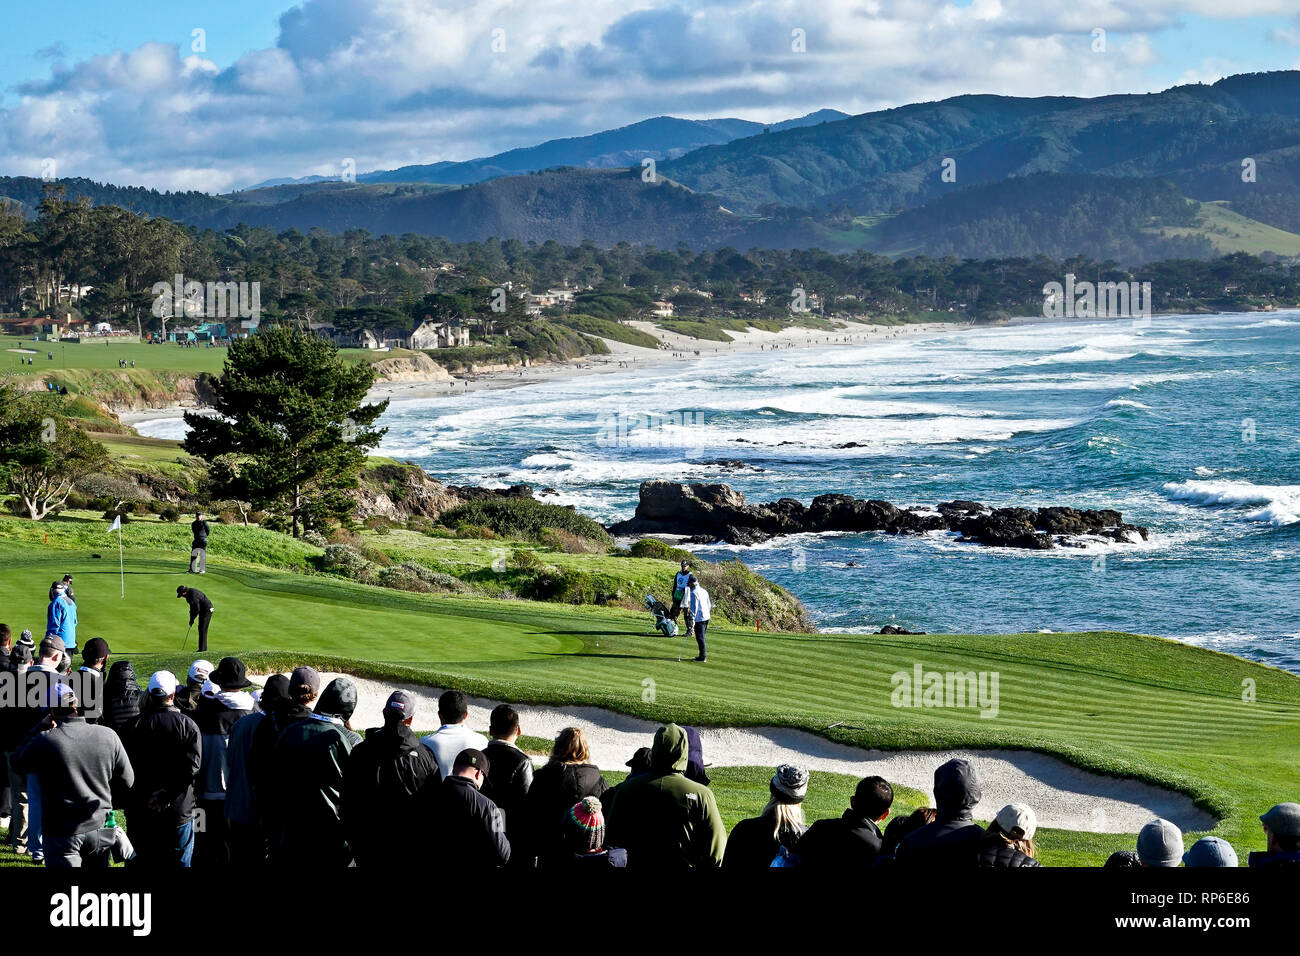 11th February, 2019  Pebble Beach Golf Links, CA, USA  The 8th hole at Pebble Beach Golf Course with a view to Carmel Beach during the AT&T Pebble Bea Stock Photo